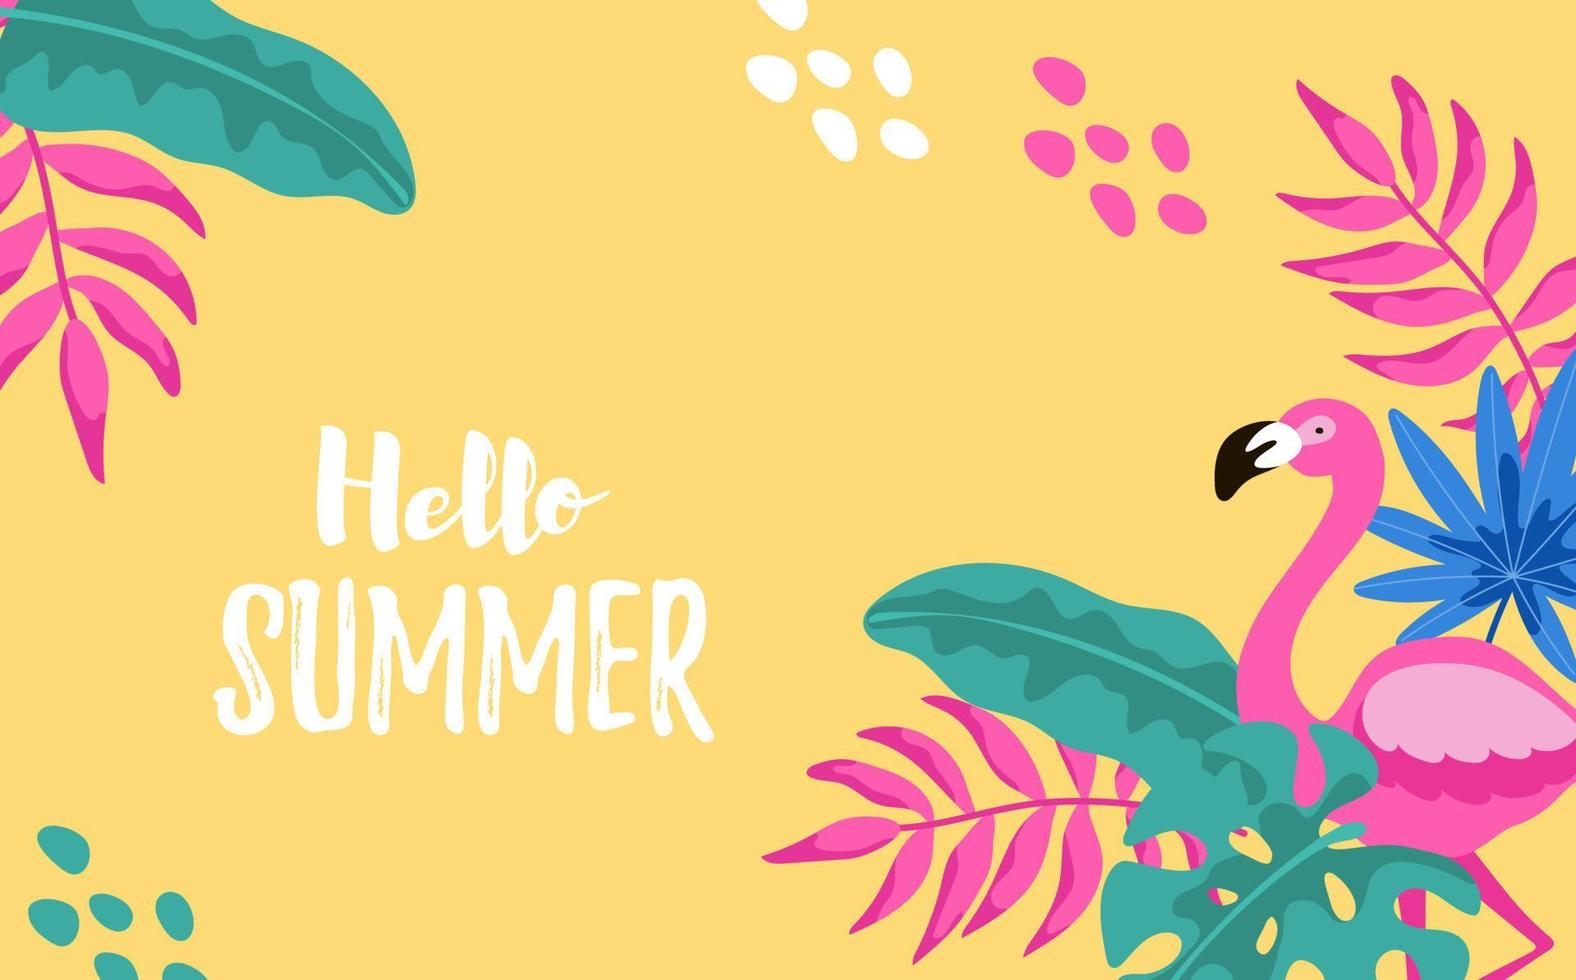 Hello Summer horizontal tropical background. Vector illustration with hand drawn elements